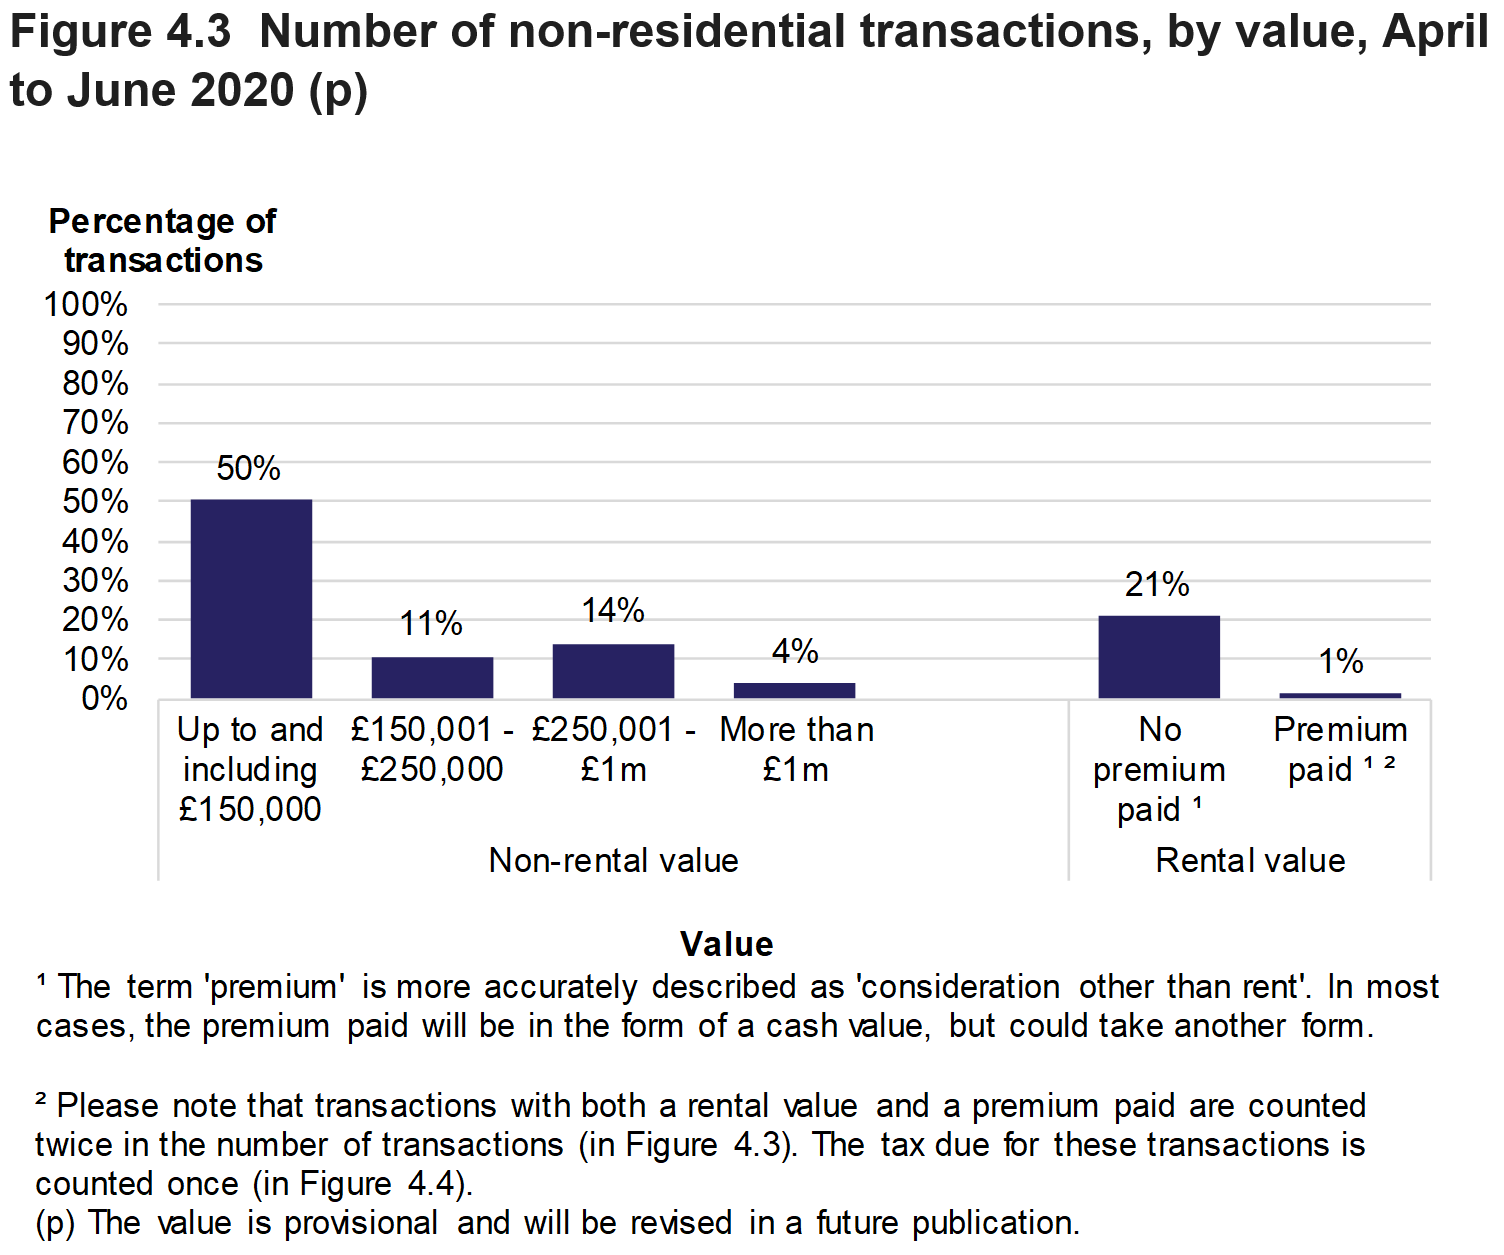 Figure 4.3 shows the number of non-residential transactions by value of the property. Data is presented as the percentage of transactions and relates to transactions effective in April to June 2020